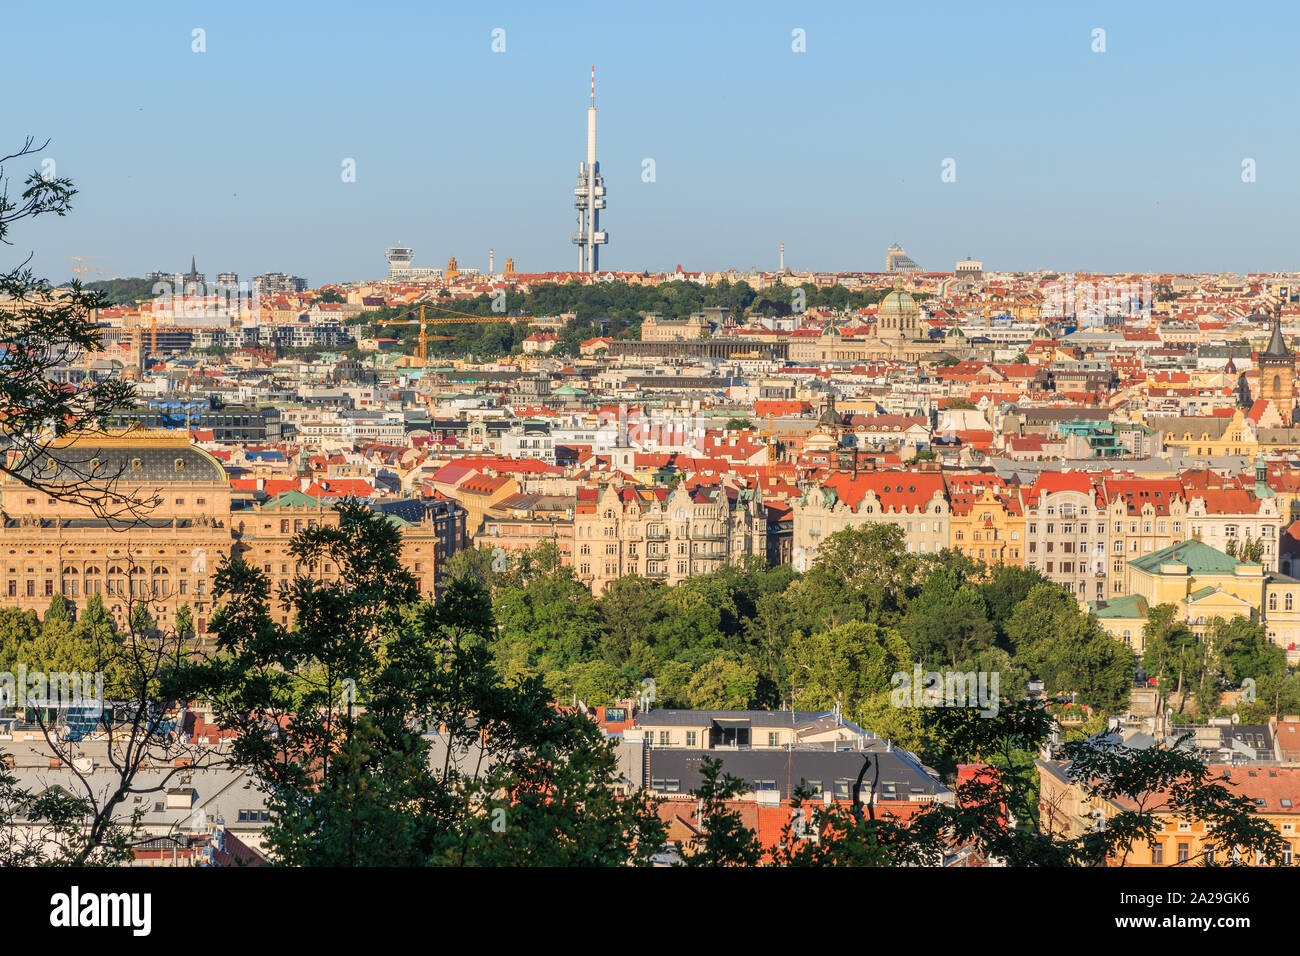 View over the rooftops and historical buildings of Prague the capital of the Czech Republic with TV tower on a sunny day with blues sky and bushes in Stock Photo